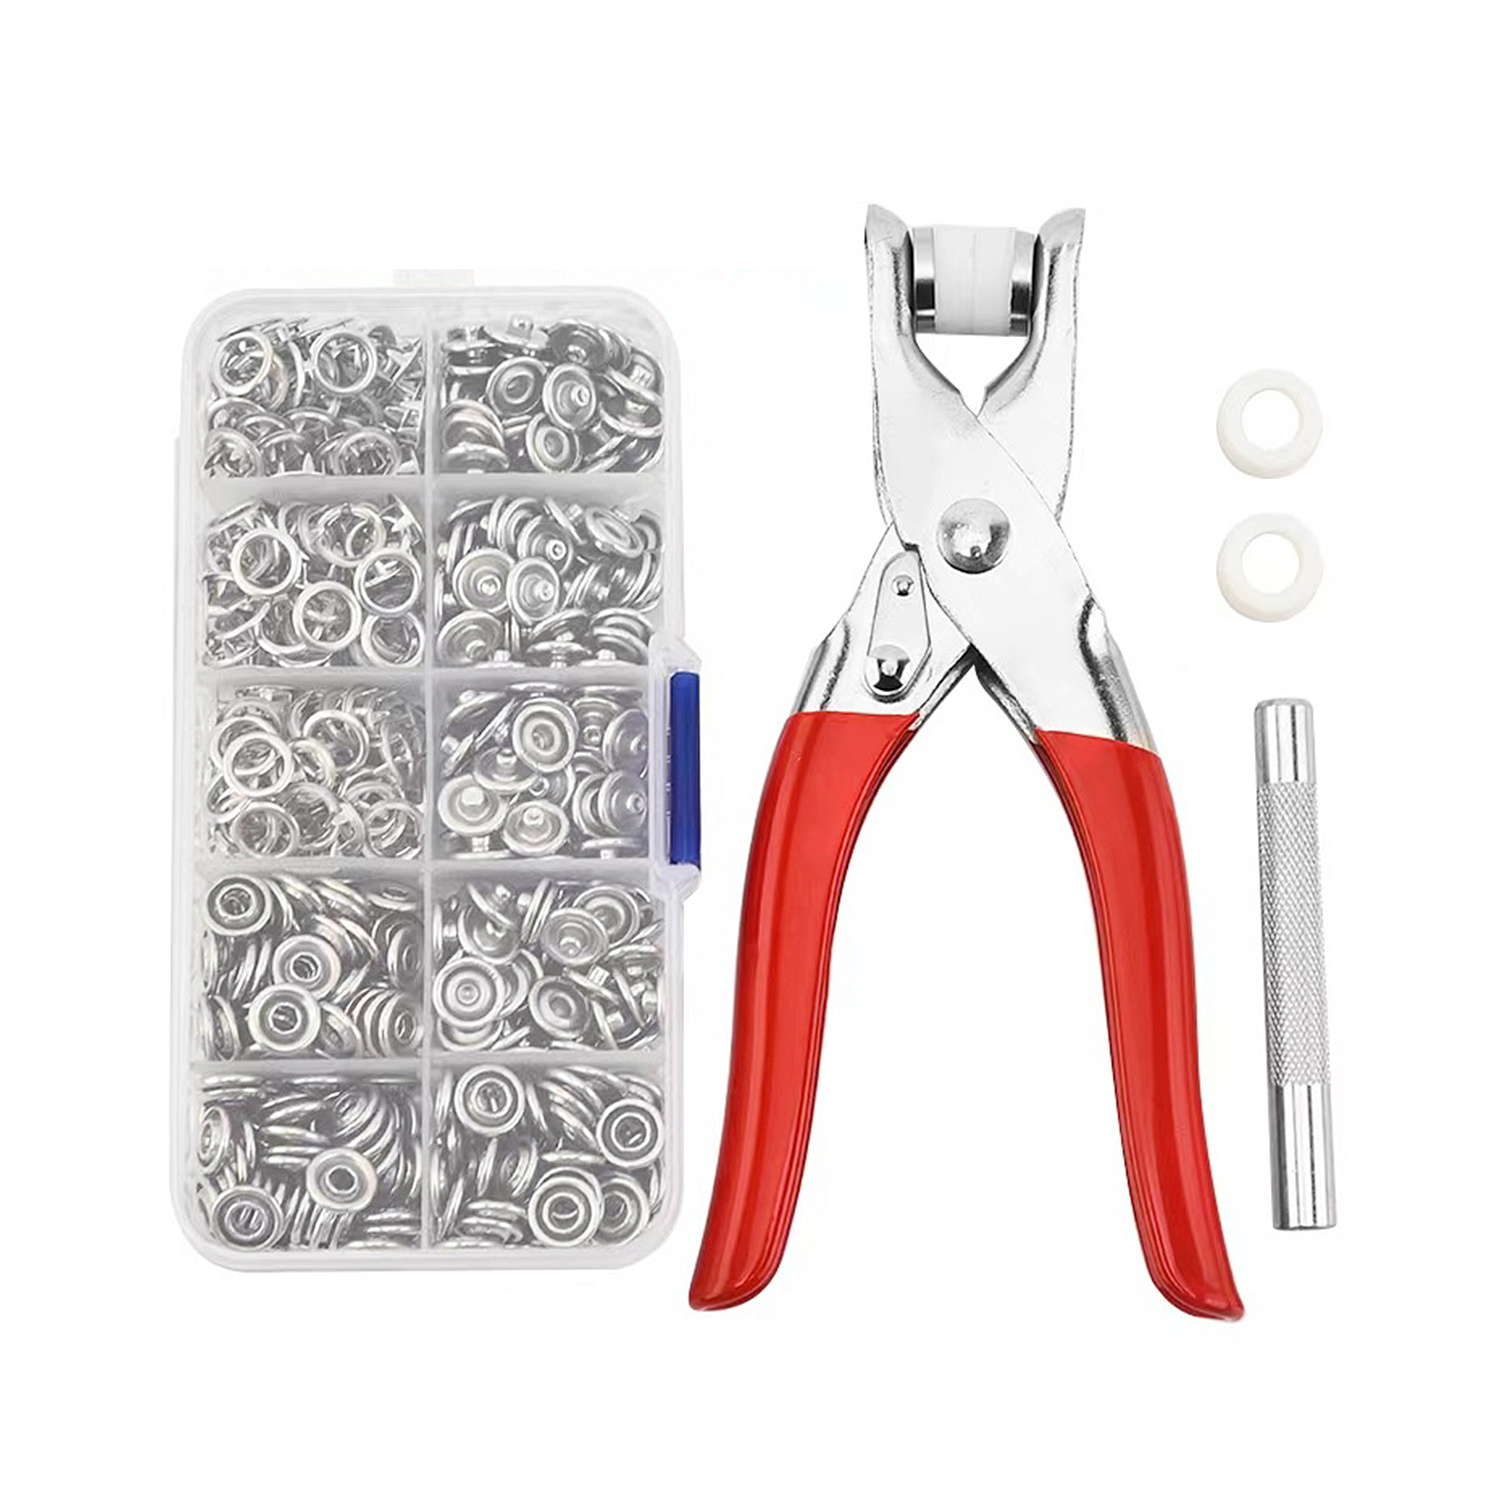 100pcs set metal snaps buttons with fastener pliers press tool kit perfect for diy crafts clothes hats and sewing